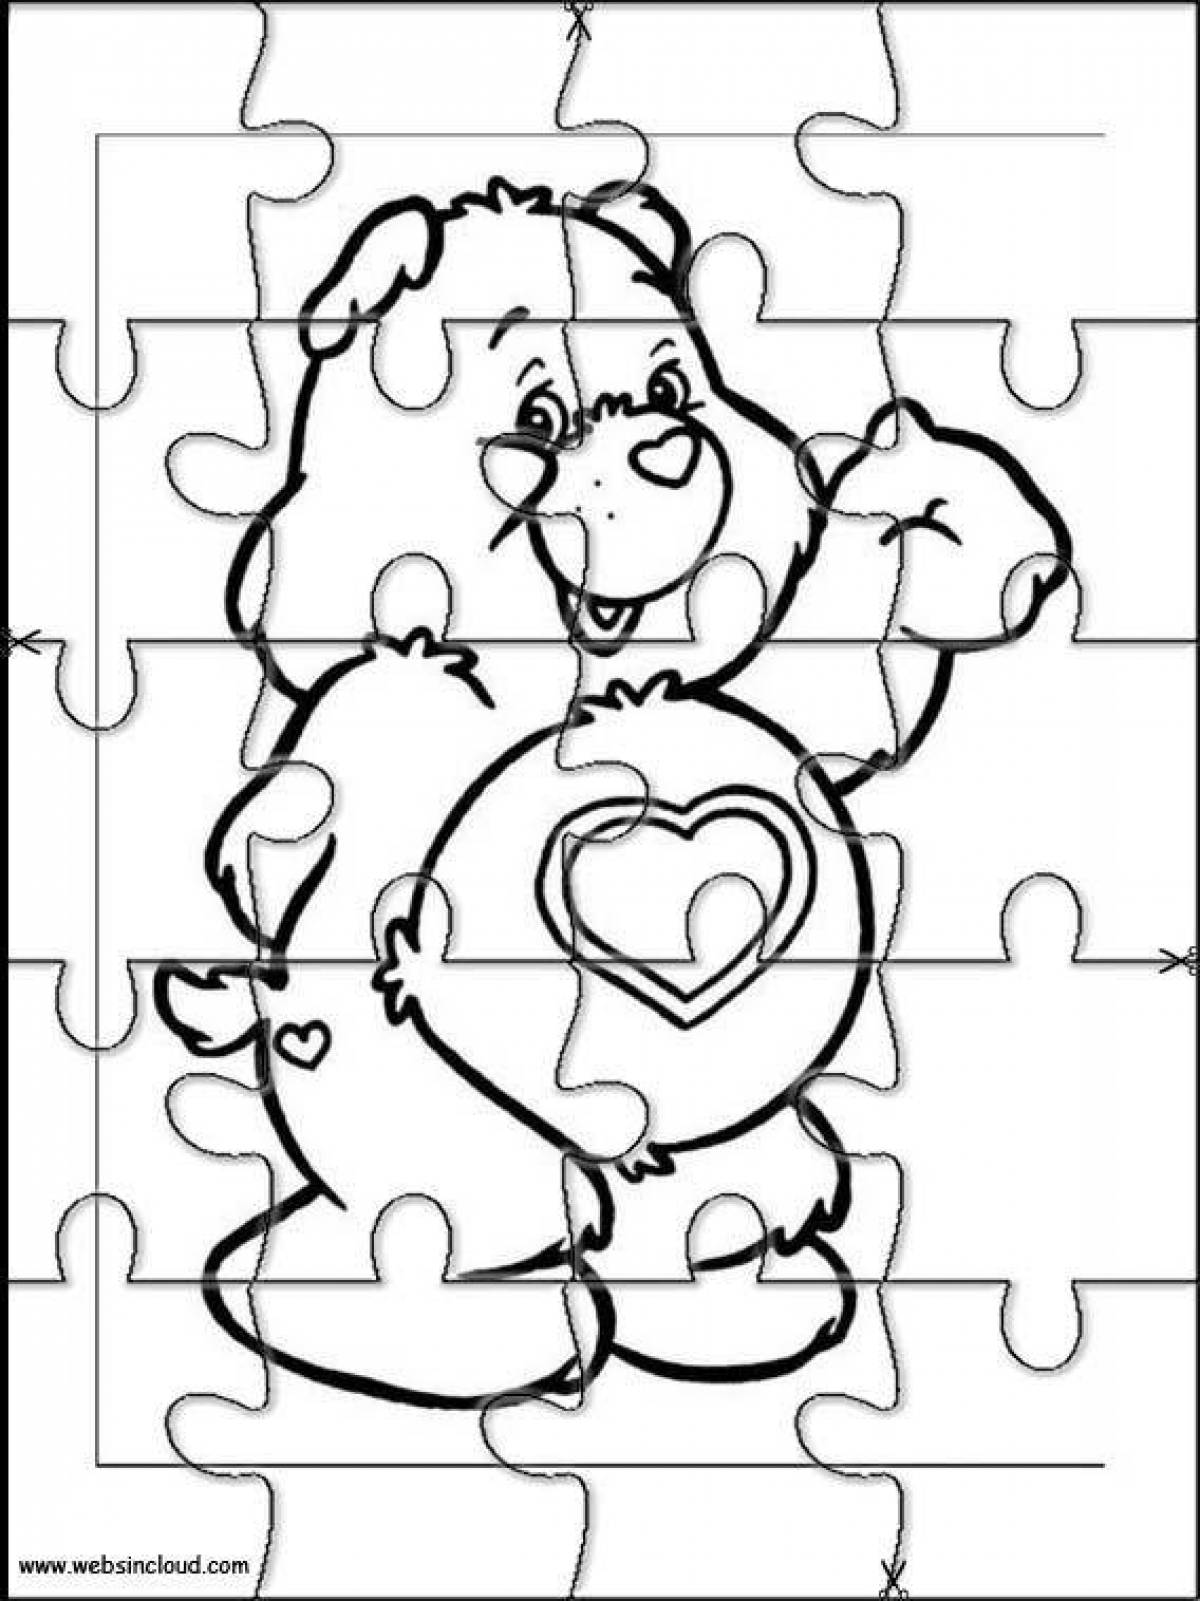 Creative puzzle coloring pages